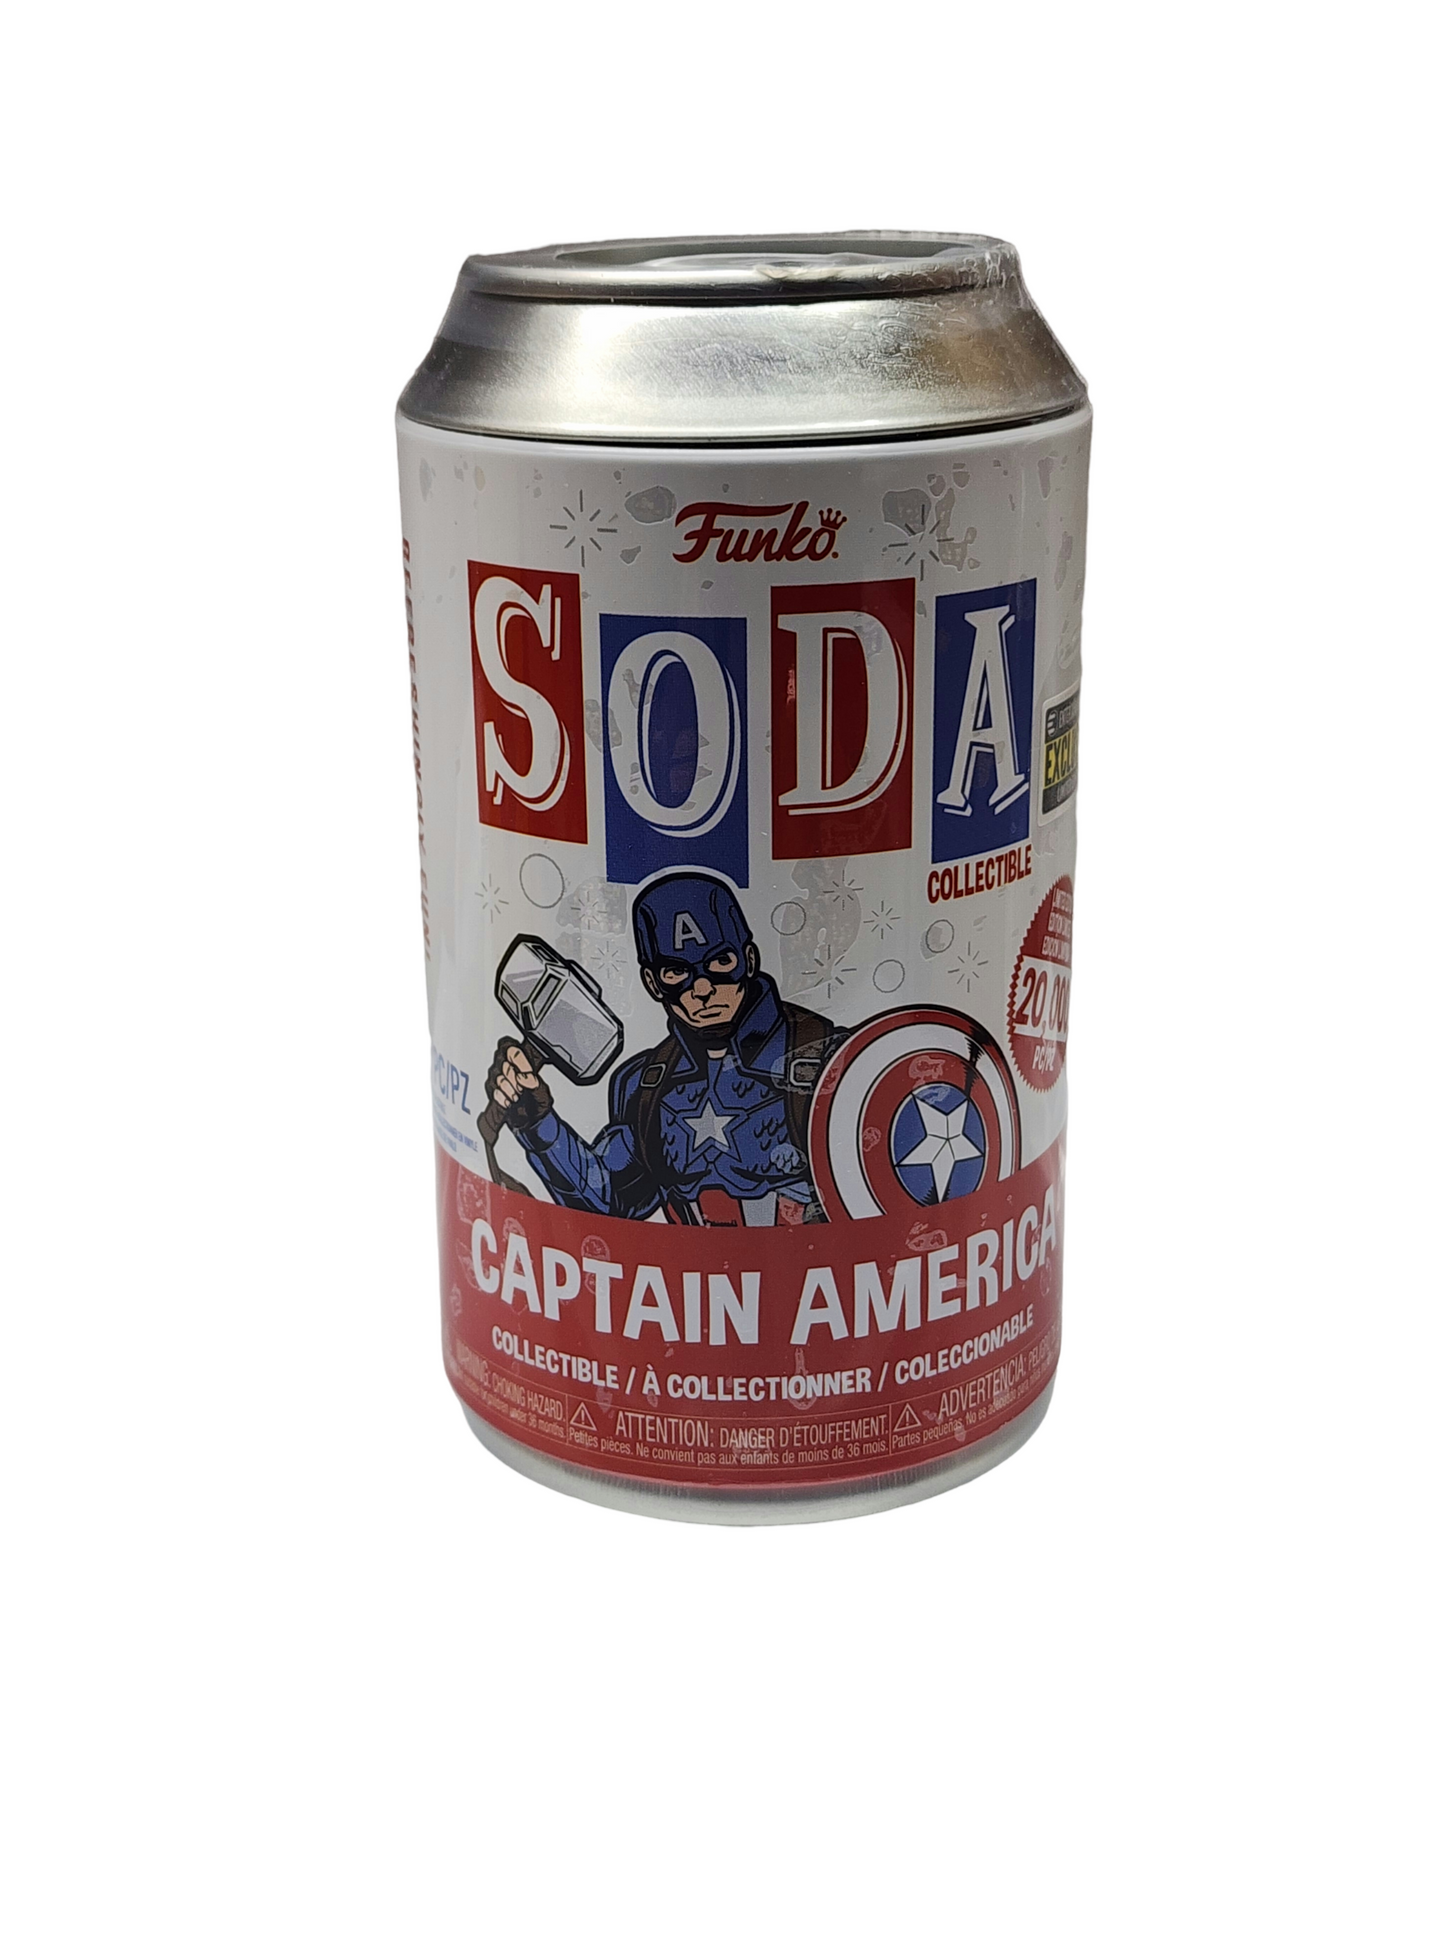 Captain America Vinyl Soda Figure - Entertainment Earth Exclusive! This heroic figure stands approximately 4 inches tall and comes packaged inside a collectible soda can, making it a must-have addition to any Marvel collection.